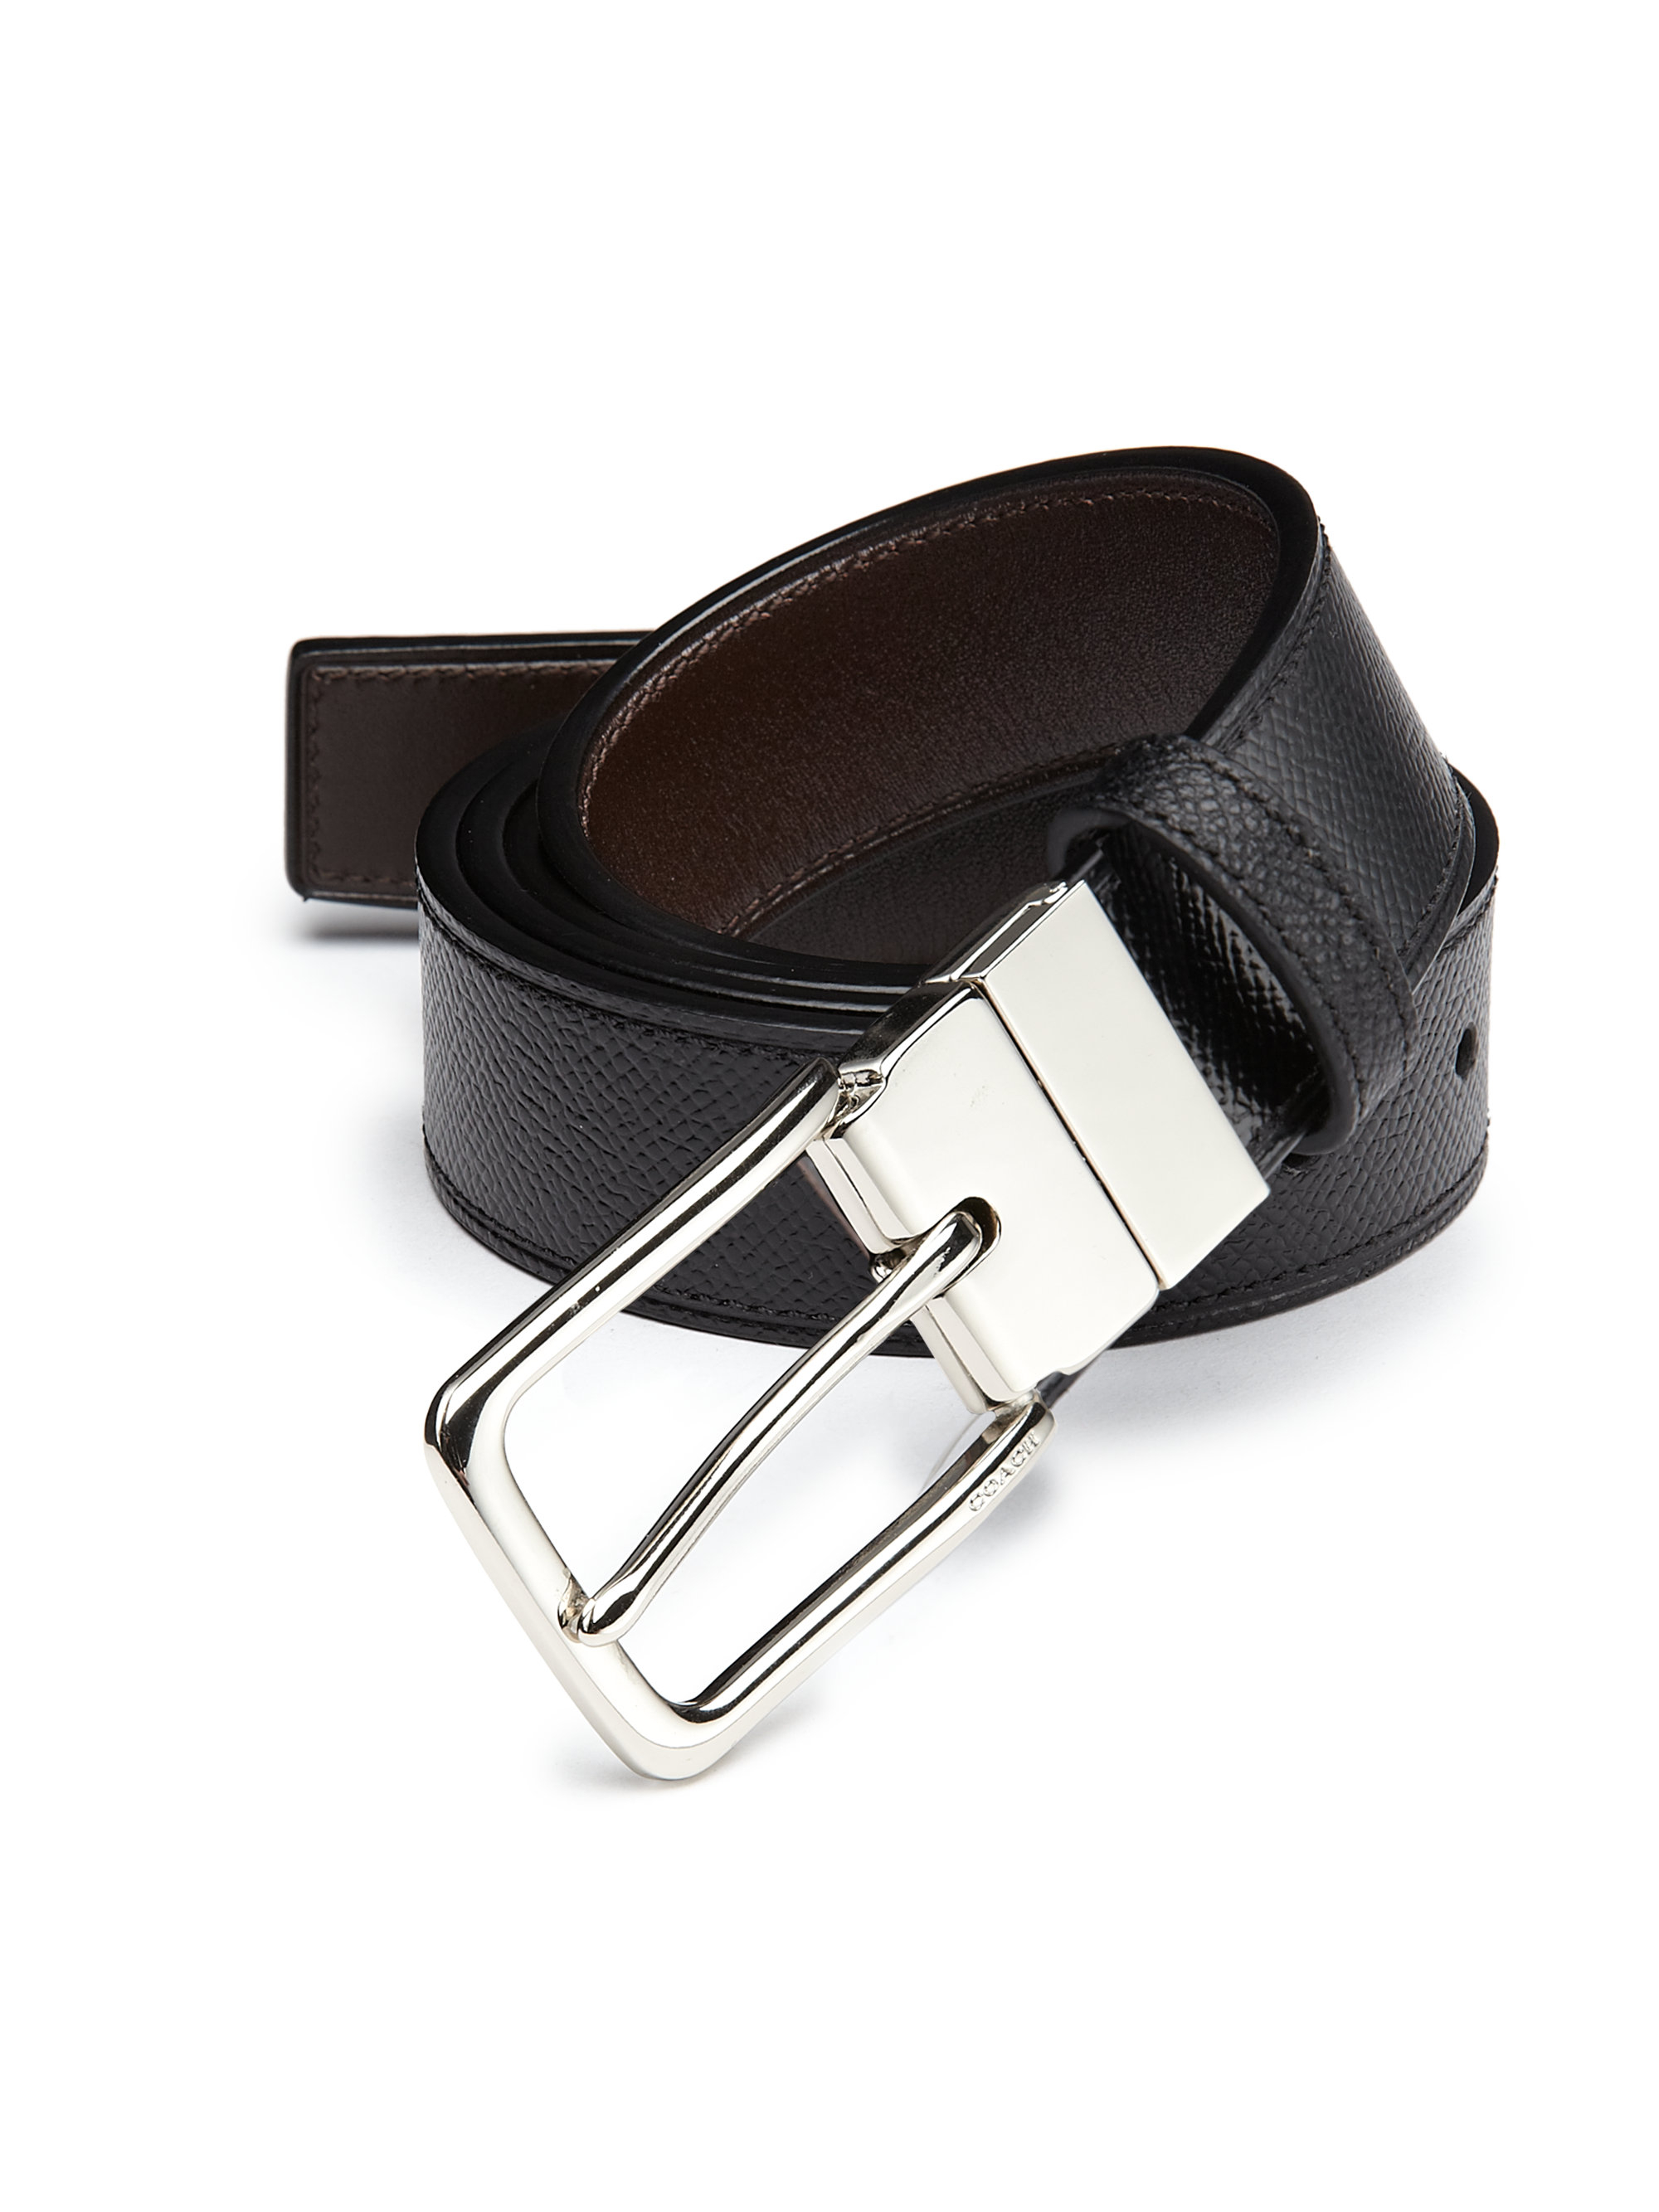 Lyst - Coach Textured Leather Belt in Black for Men